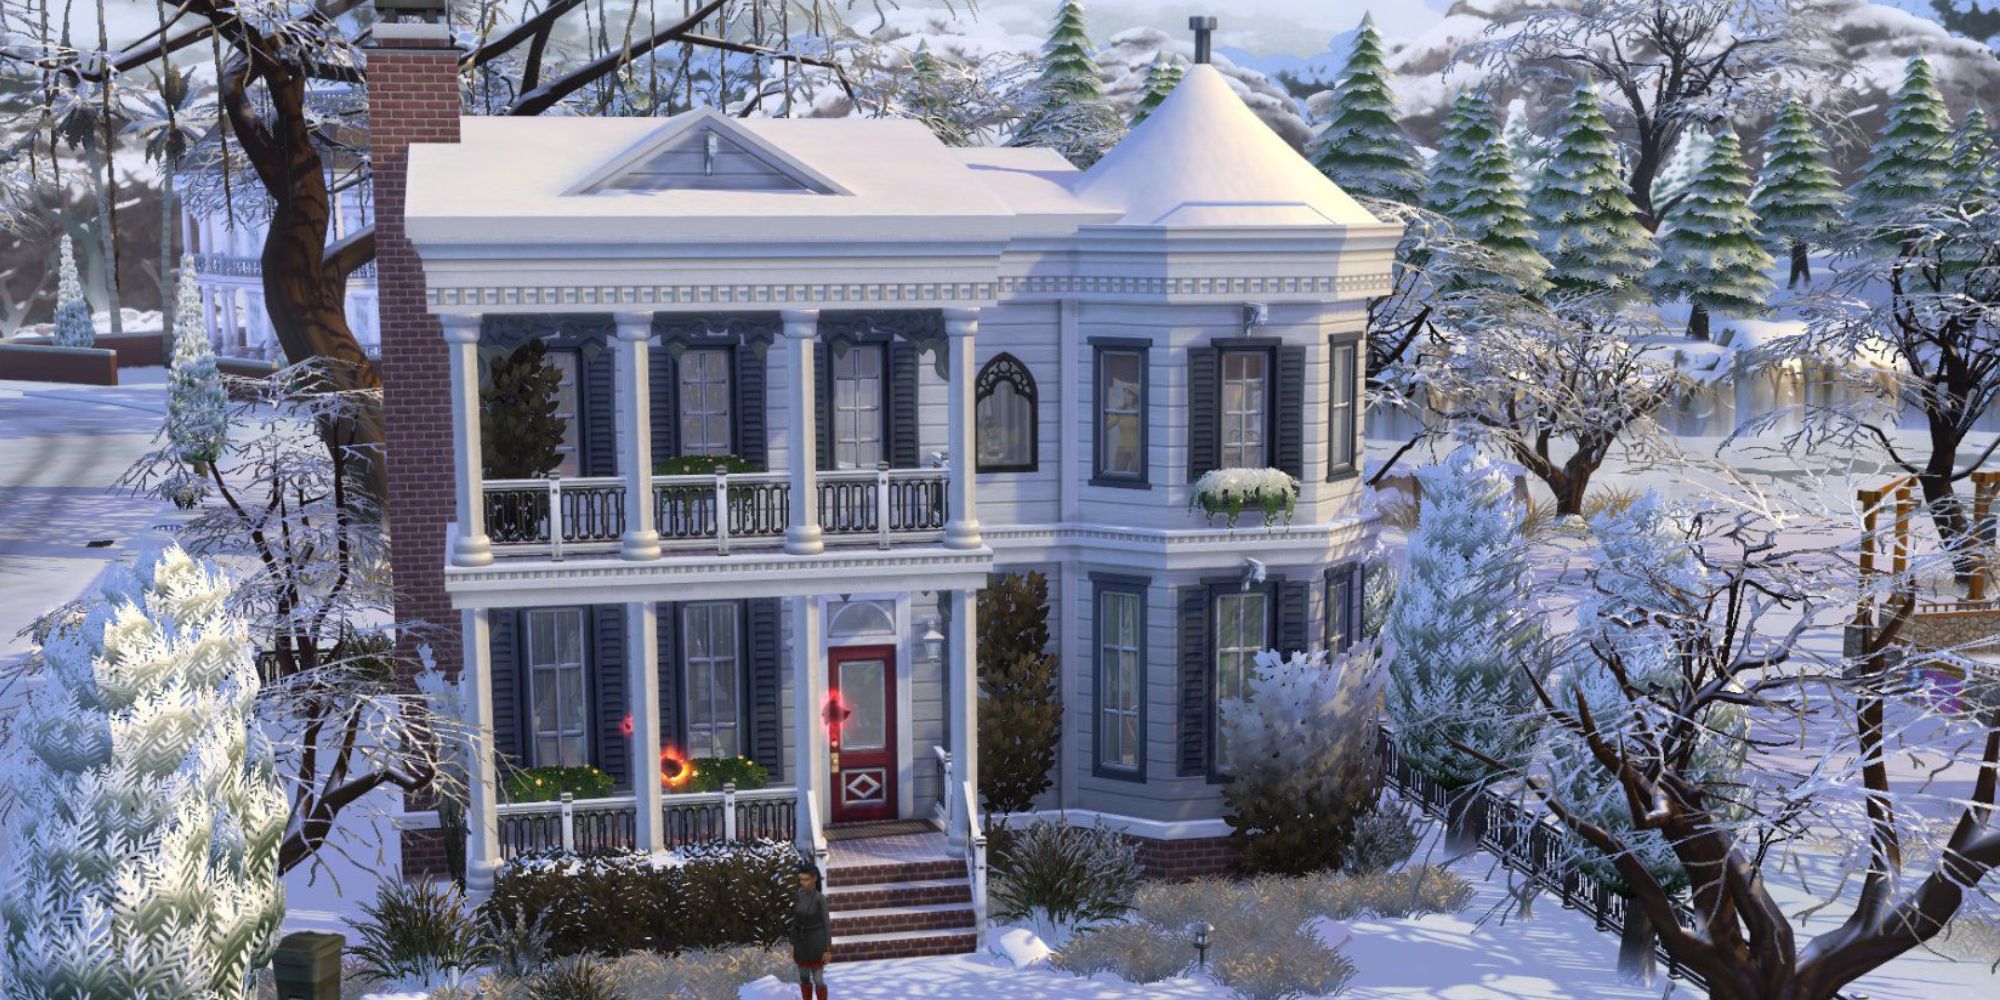 https://static1.thegamerimages.com/wordpress/wp-content/uploads/2023/05/the-sims-4-paranormal-stuff-duplantier-mansion-win-the-snow-with-spectres-outside.jpg